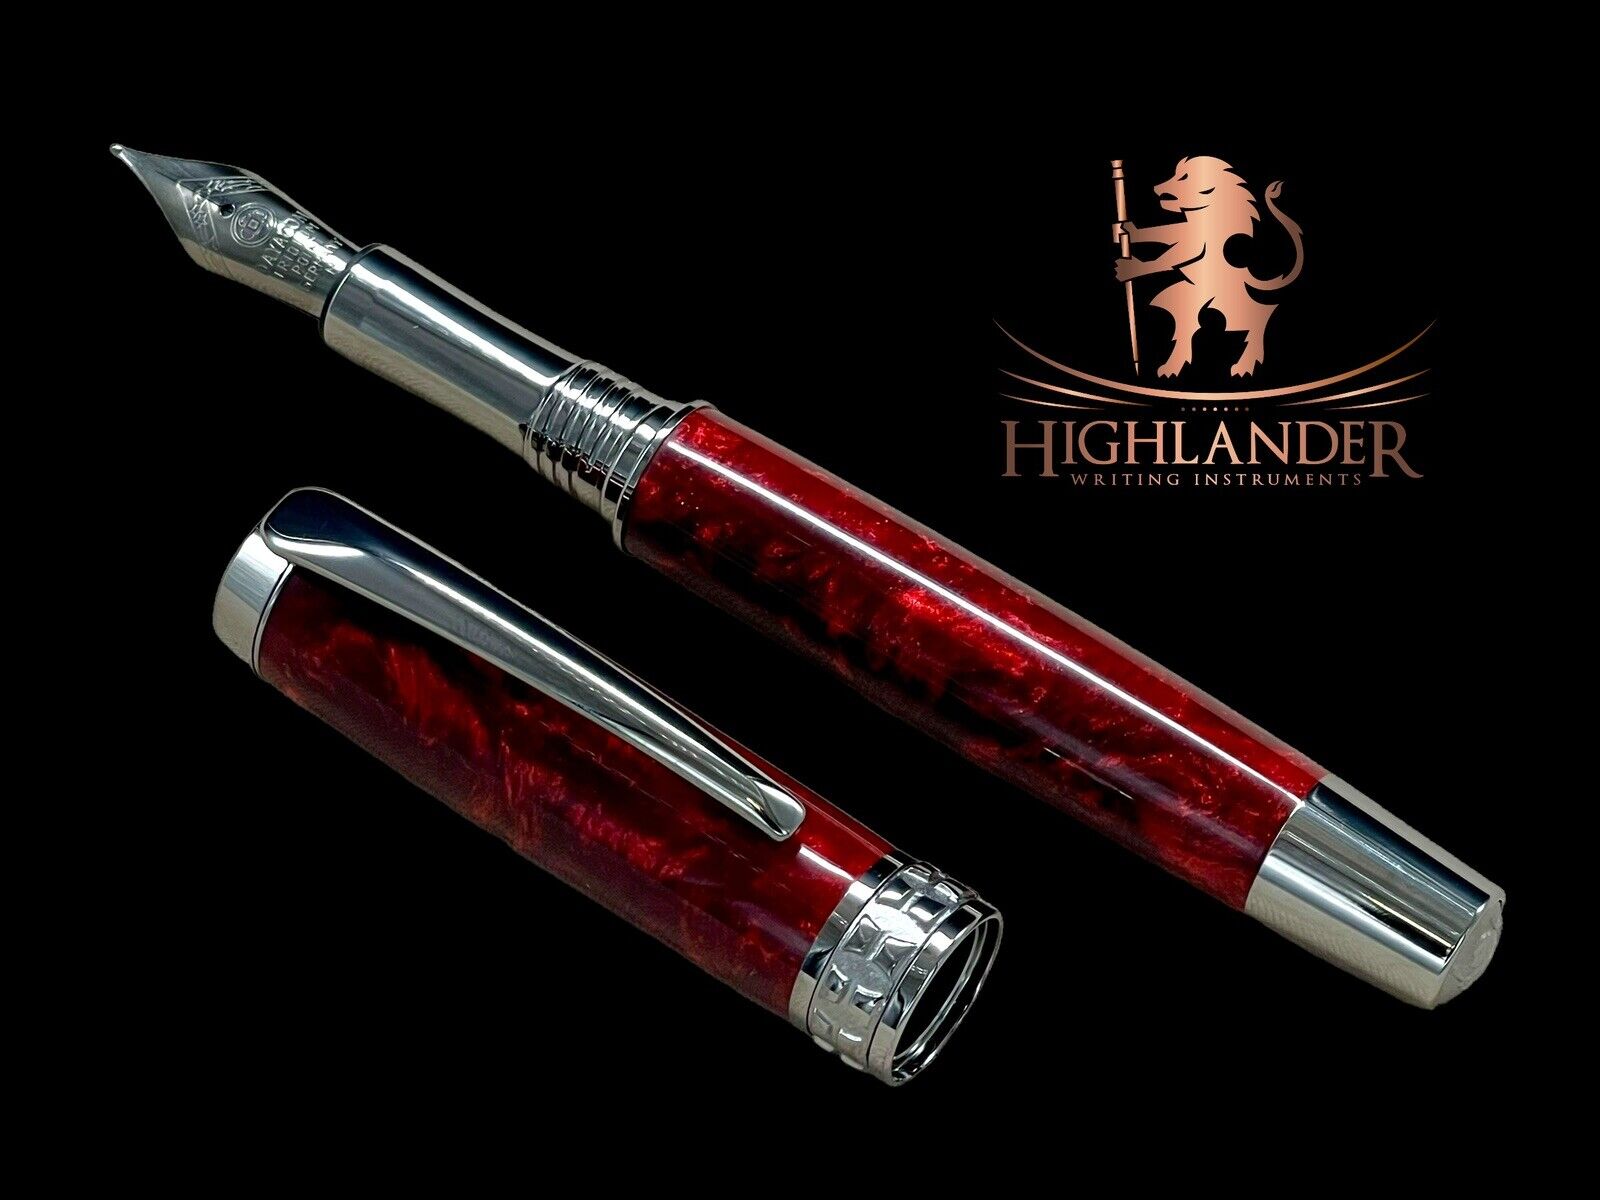 New Black Titanium Fountain Pen, Unique, One Of A Kind Handmade By Highlander